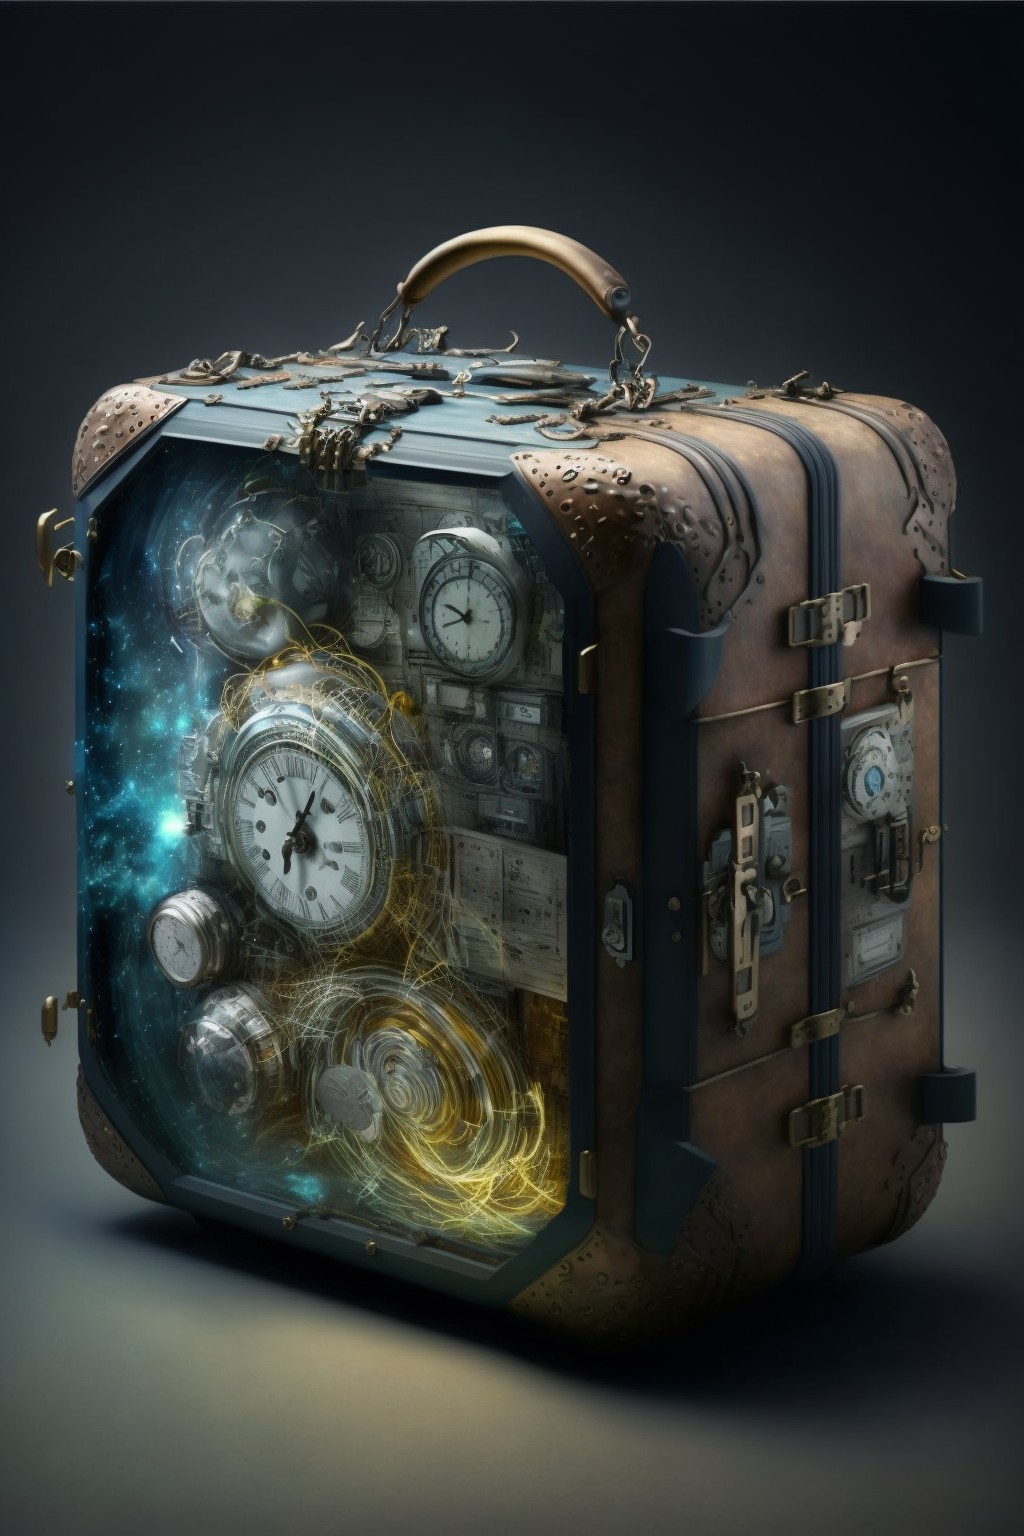 A suitcase filled with cosmic positive energy and cosmic time